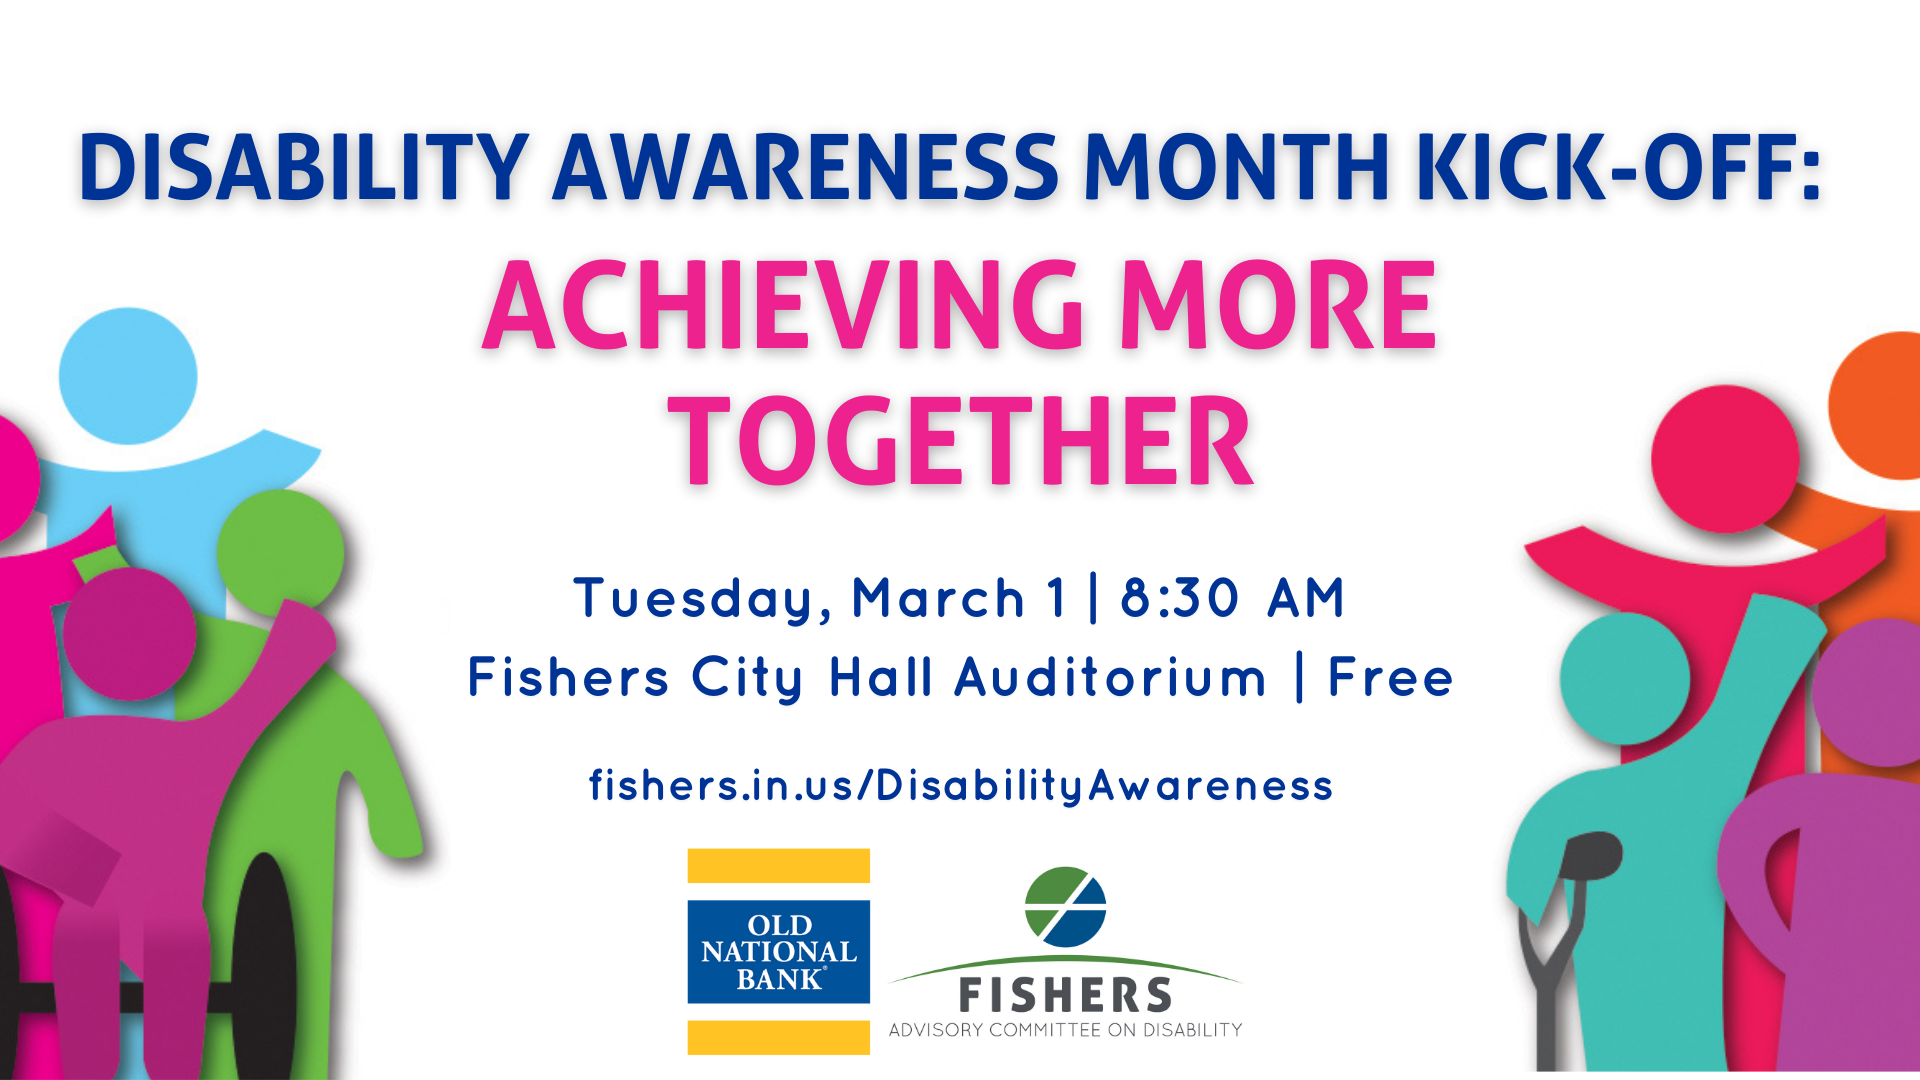 disability awareness month achieving more together tuesday march 1 8:30 am fishers city hall auditorium free fishers.in.us/disabilityawareness